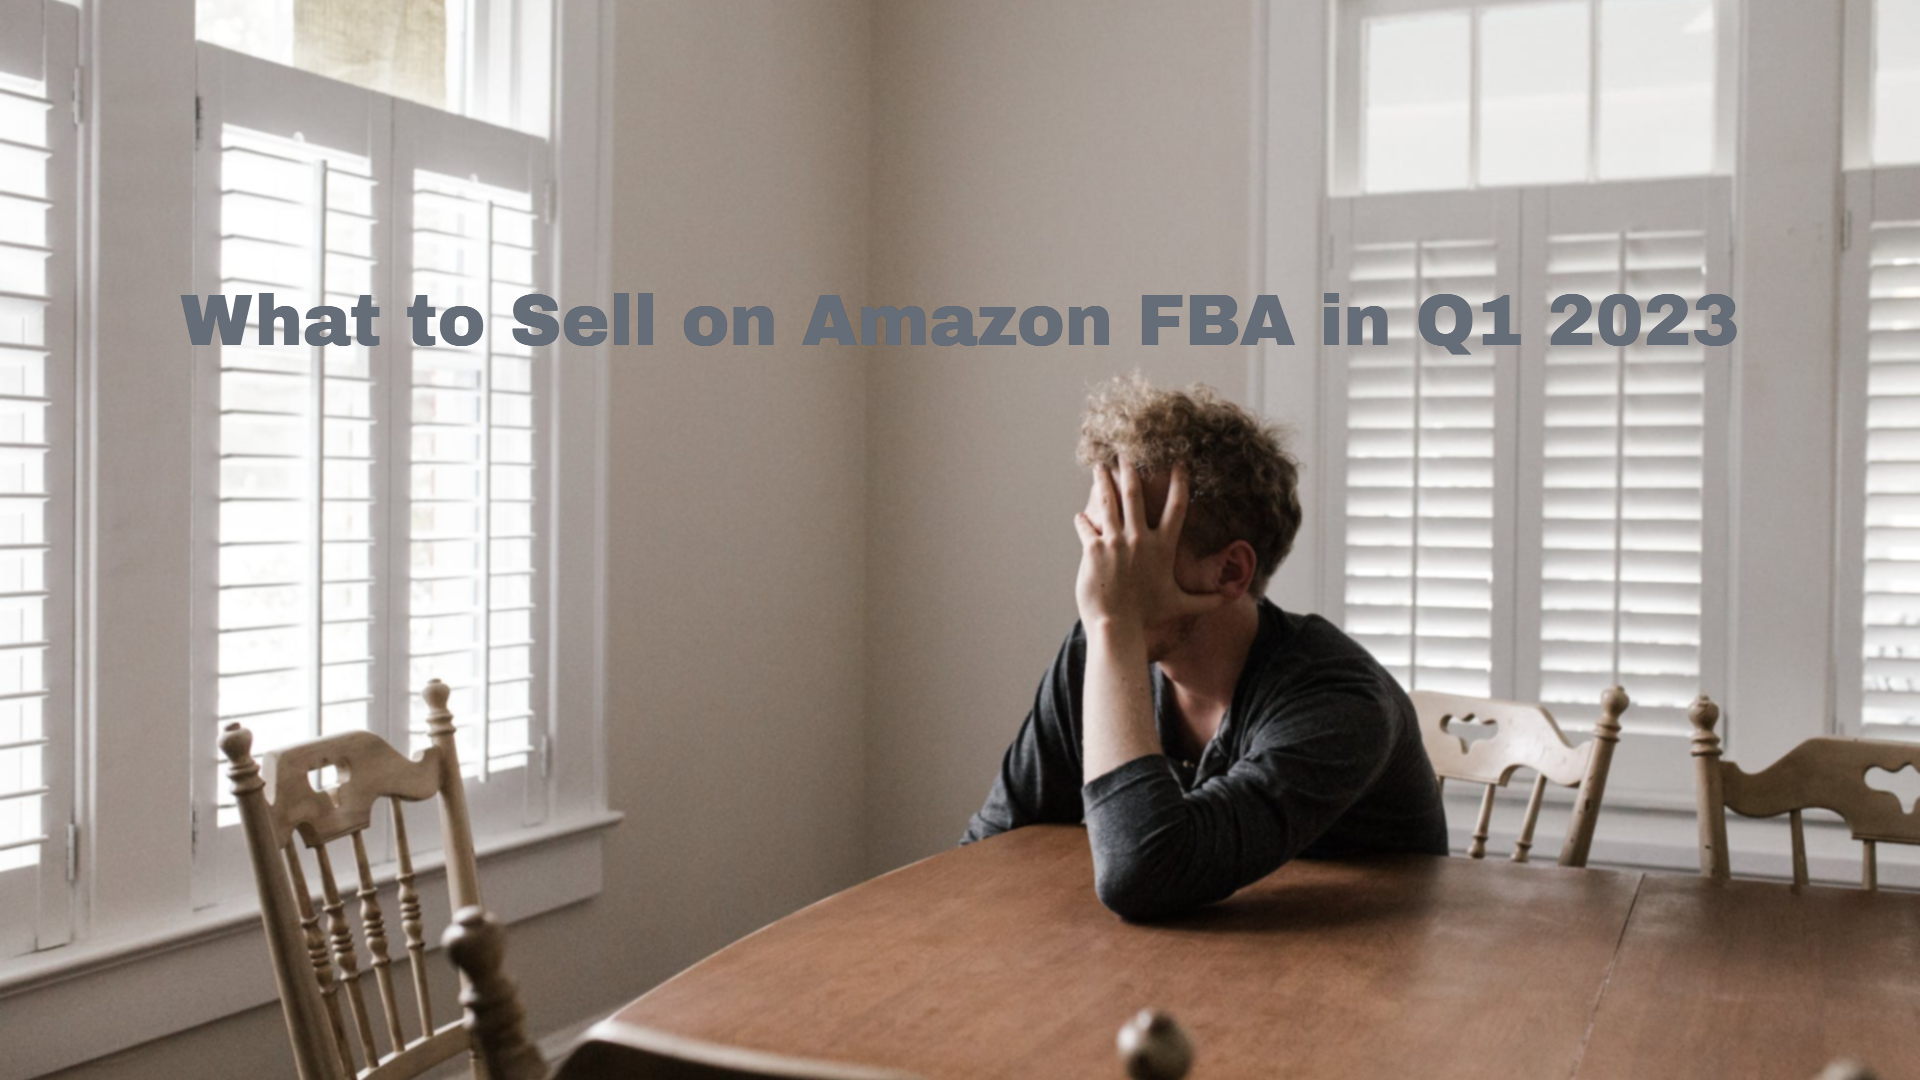 What to sell on Amazon in Q1 2023？